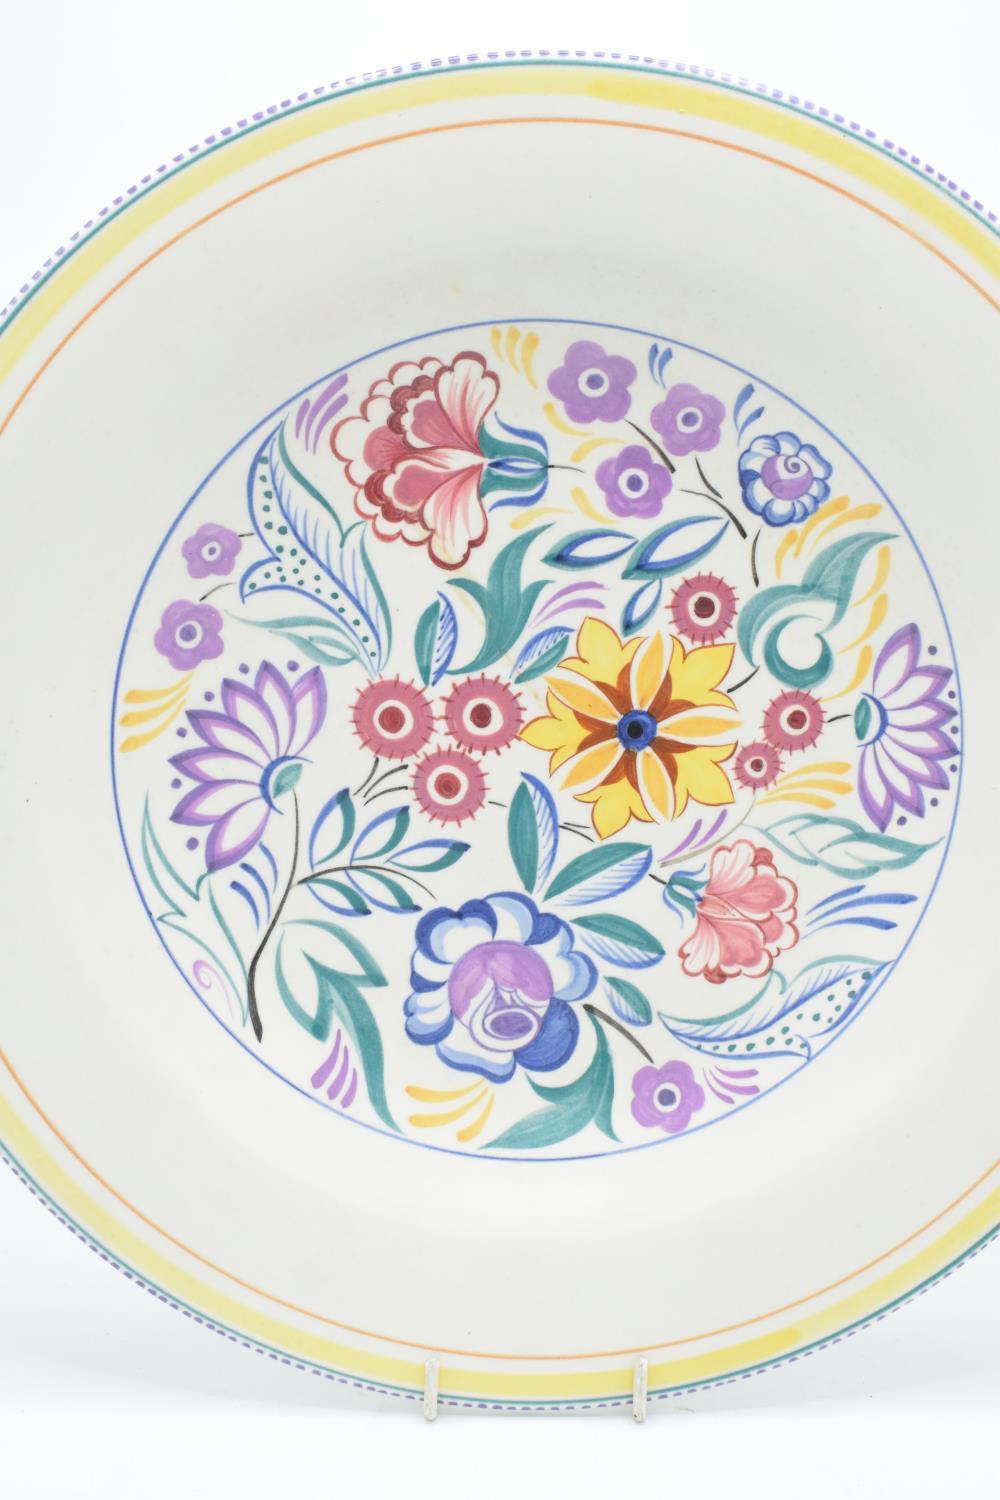 Large Poole Pottery floral charger, 39cm diameter. In good condition with no obvious damage or - Image 2 of 4